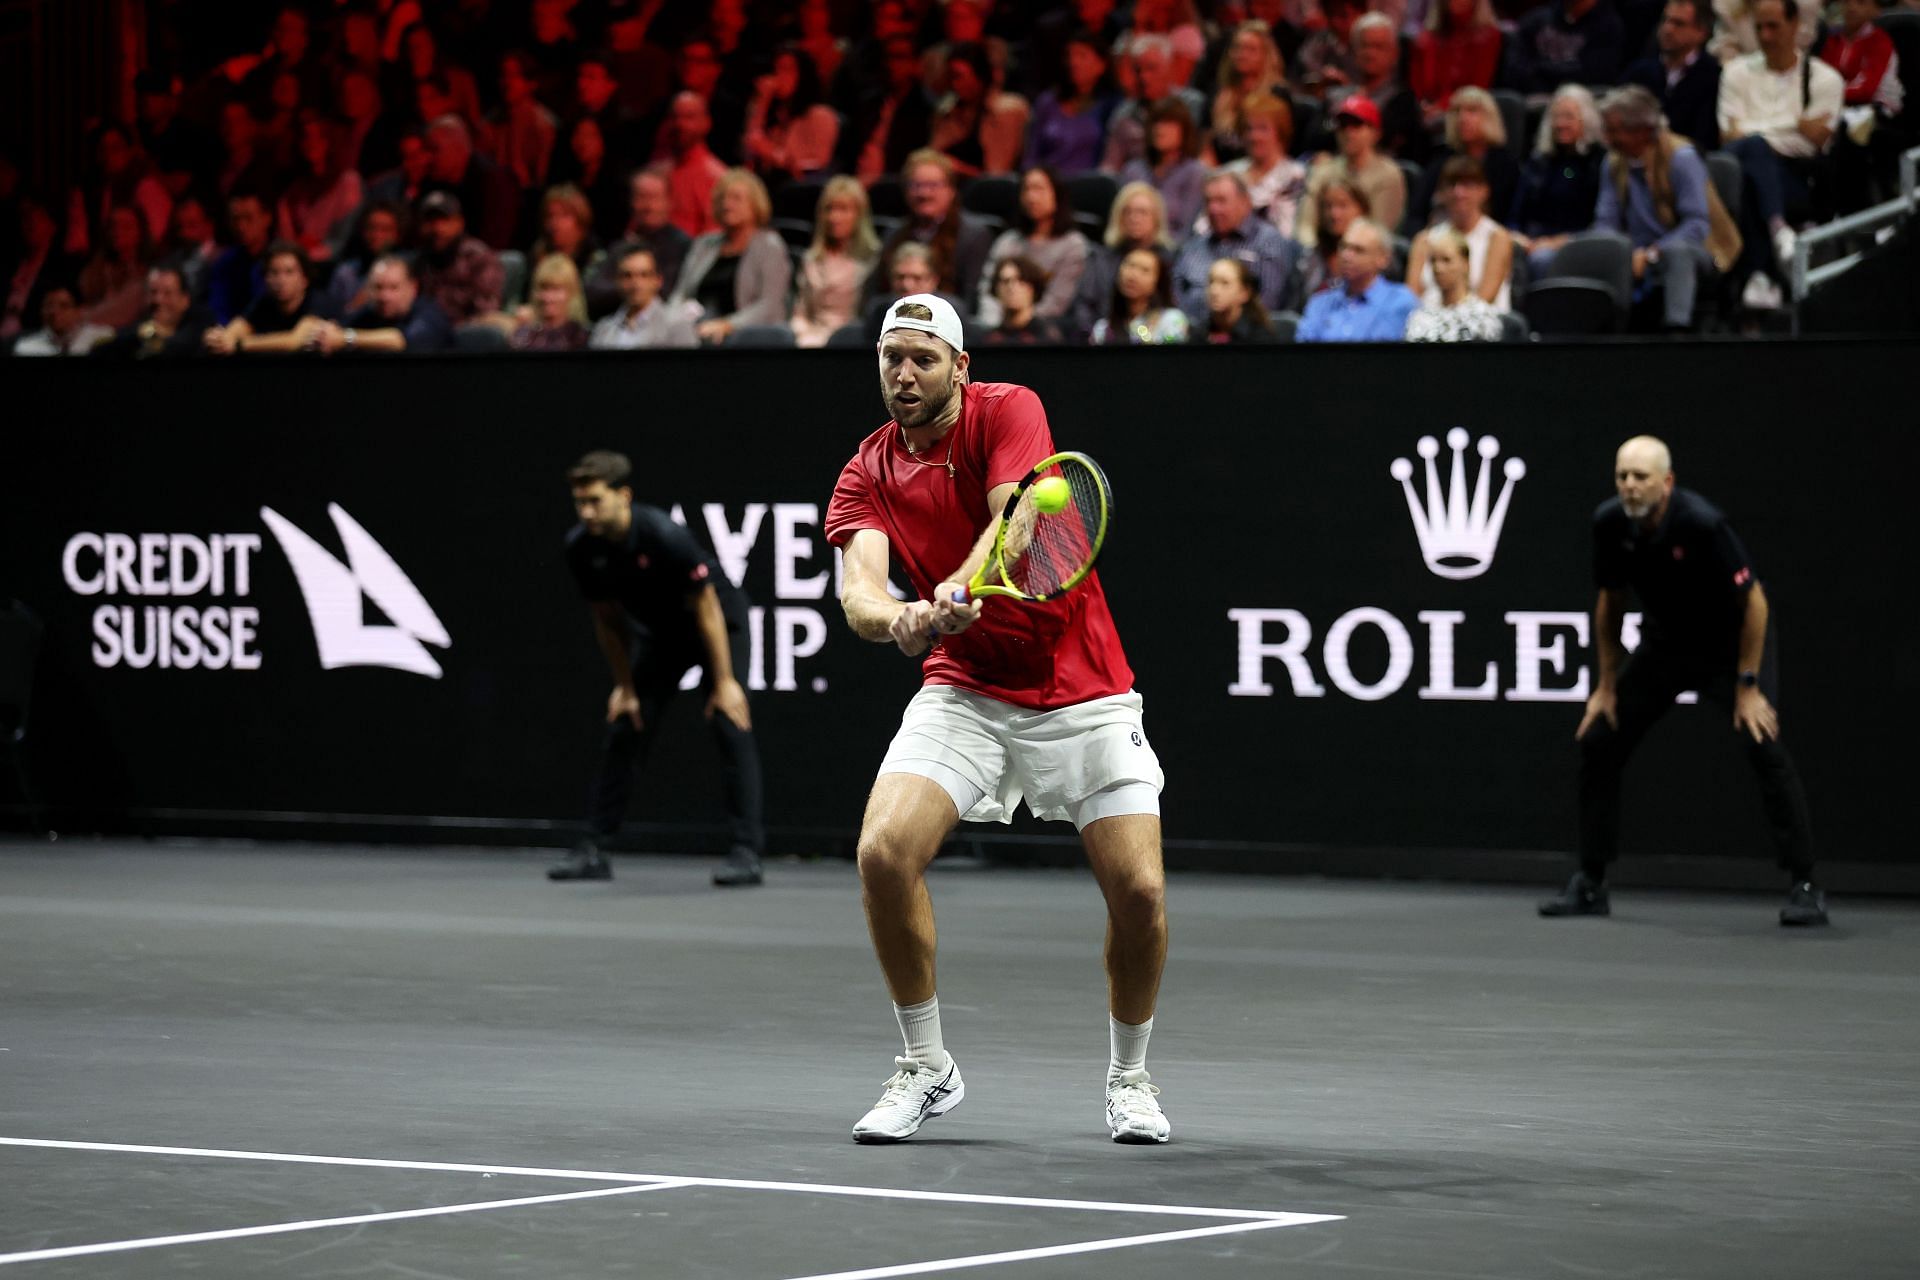 Jack Sock in action at the Laver Cup 2022